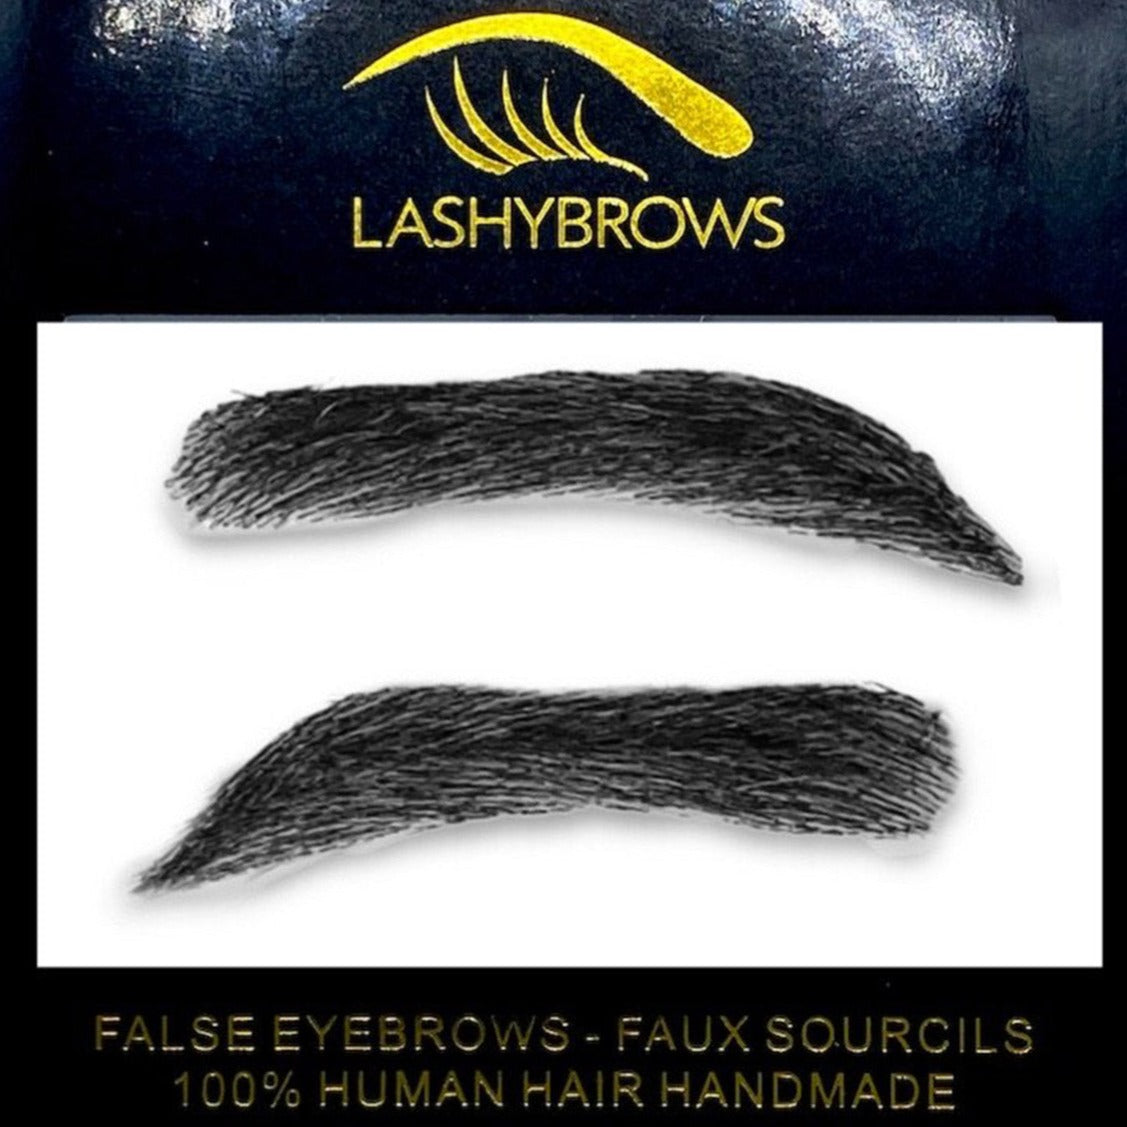 InstaBrows - George False Brows for Men